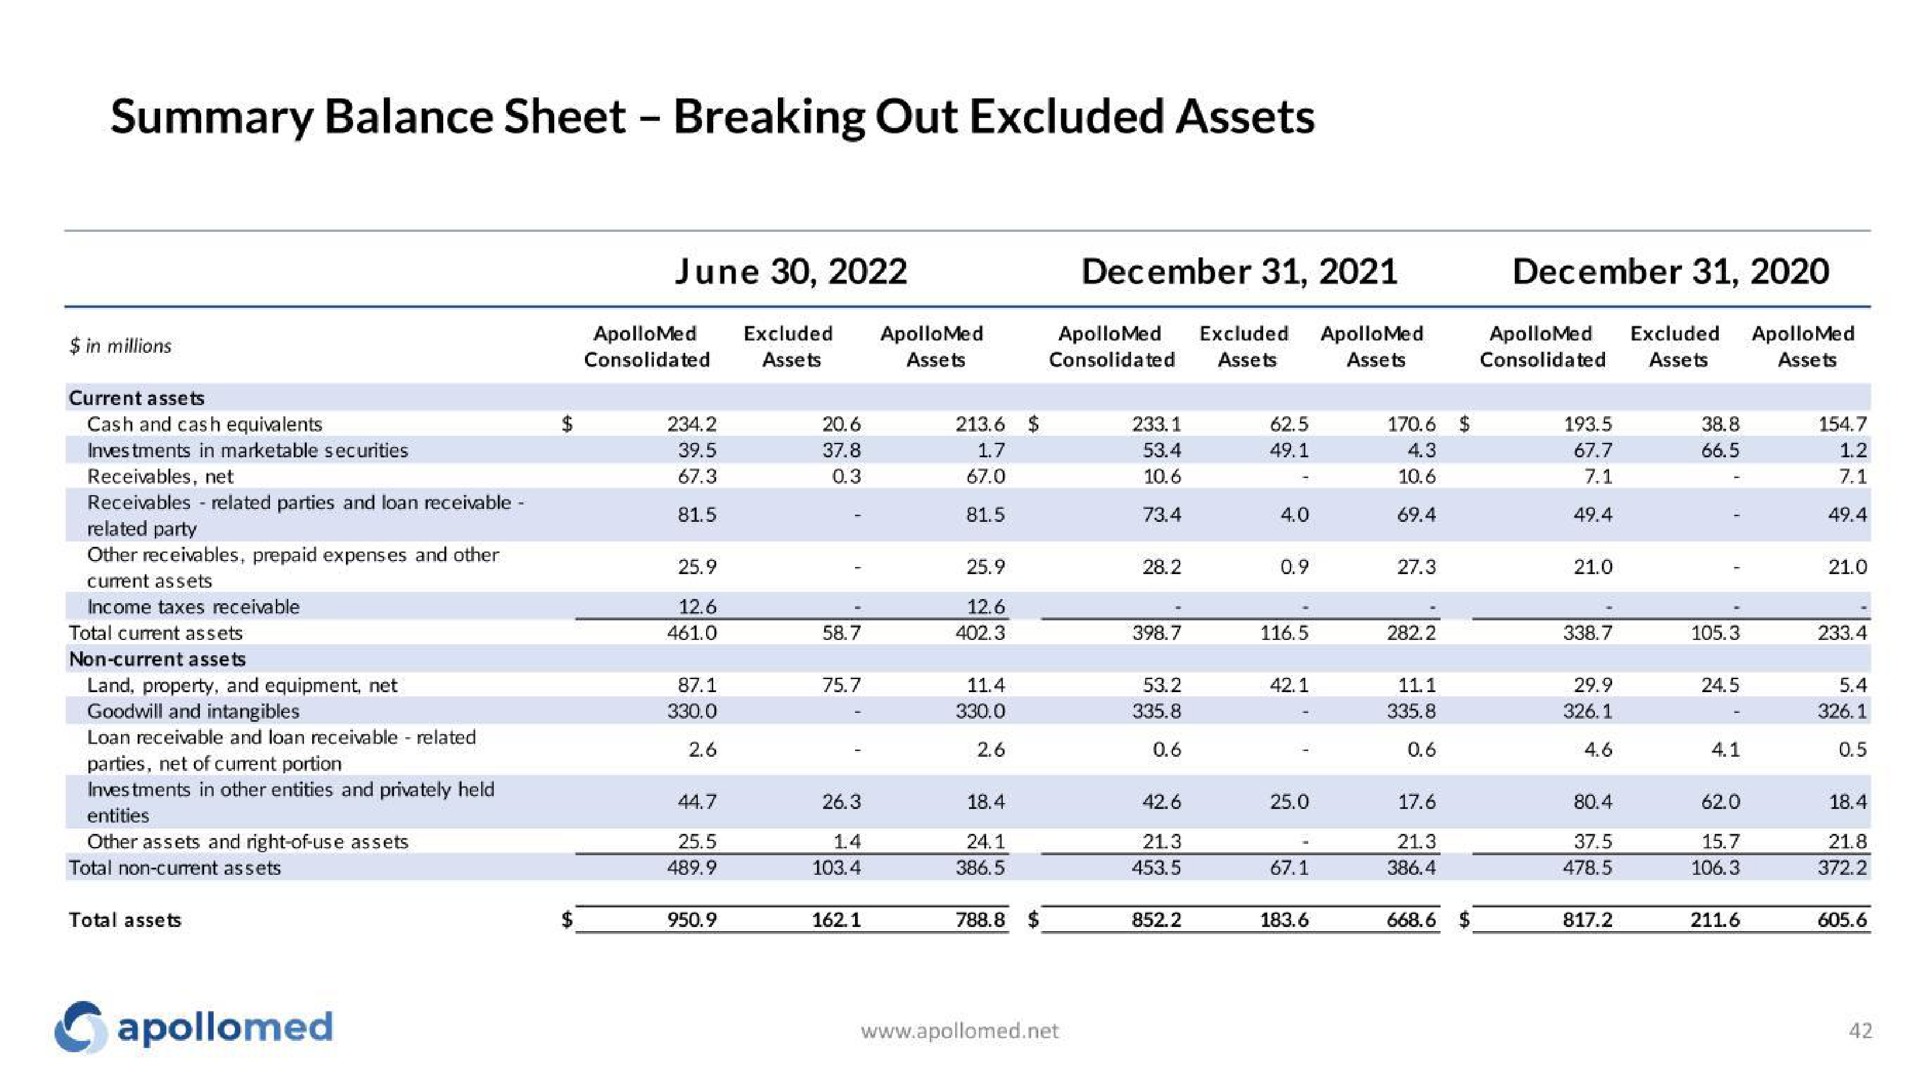 summary balance sheet breaking out excluded assets | Apollo Medical Holdings